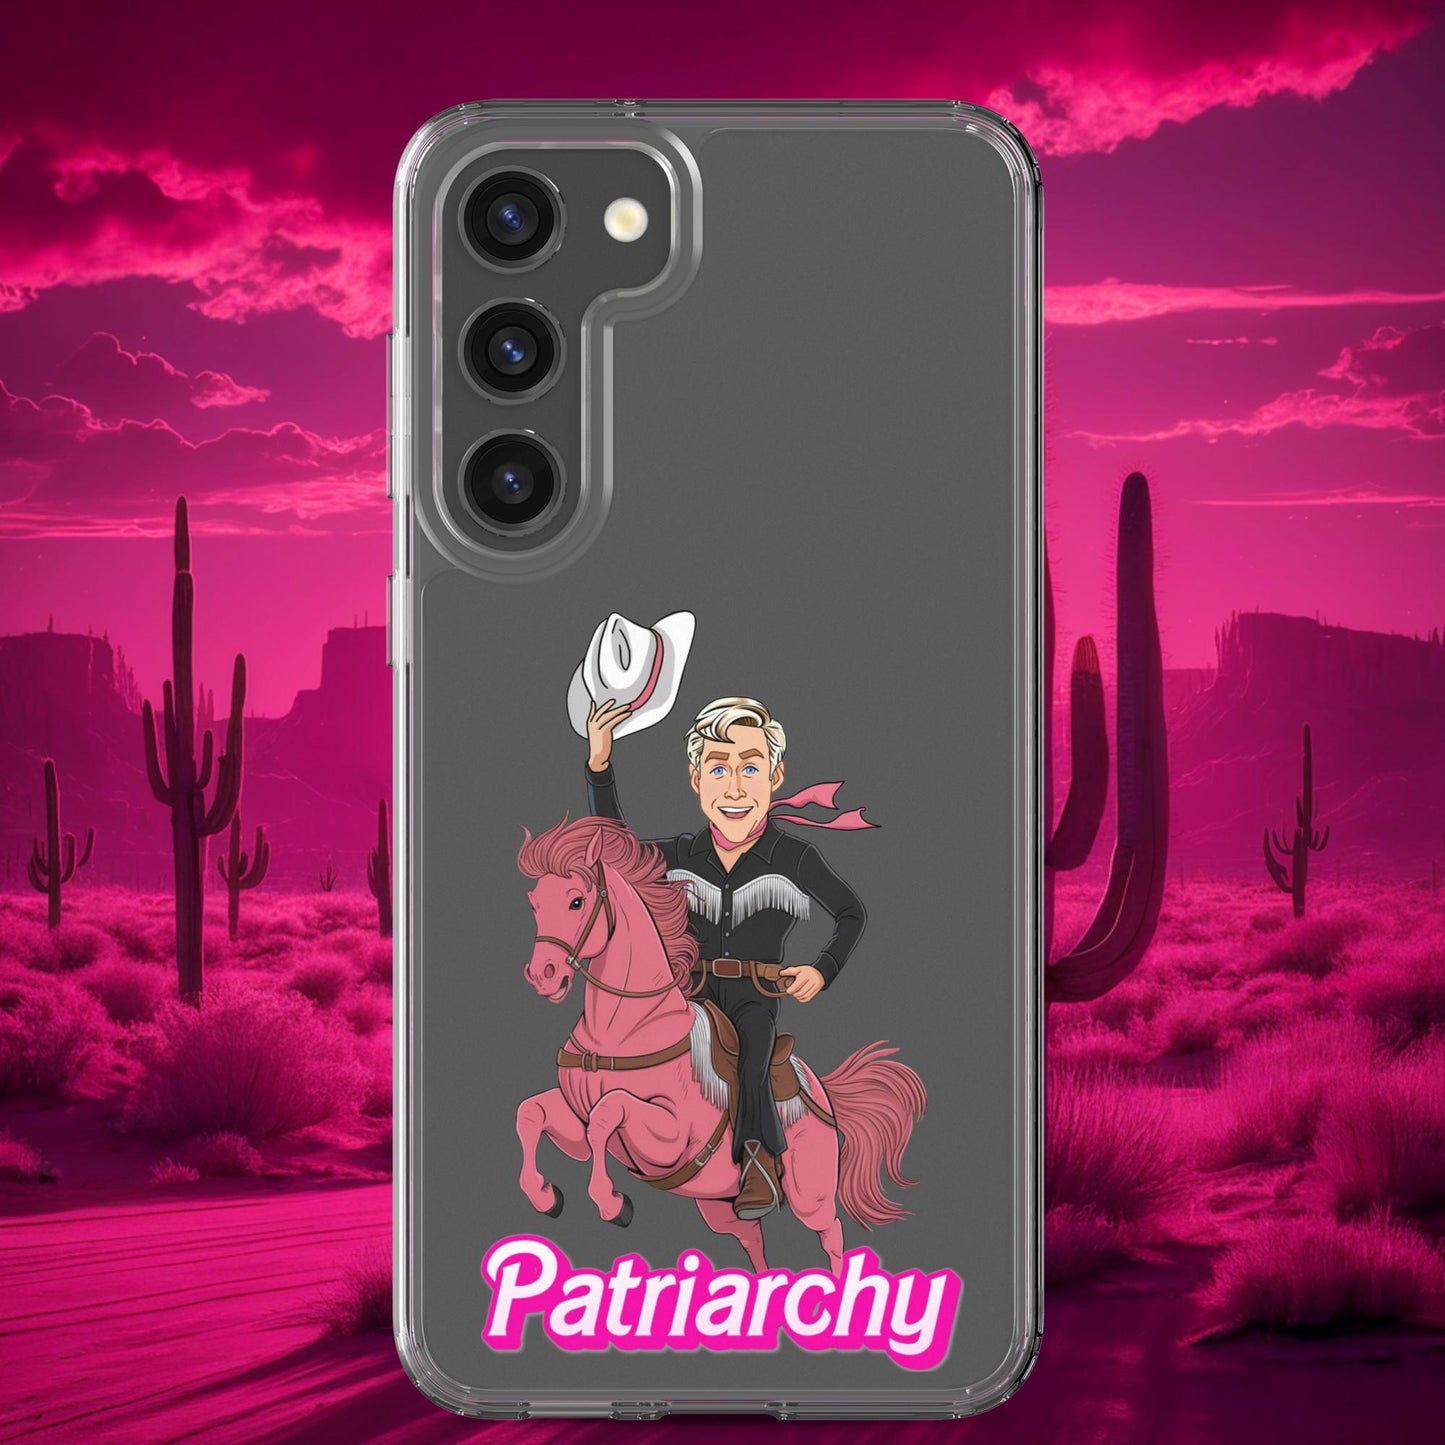 Ken Barbie Movie When I found out the patriarchy wasn't just about horses, I lost interest Clear Case for Samsung Next Cult Brand